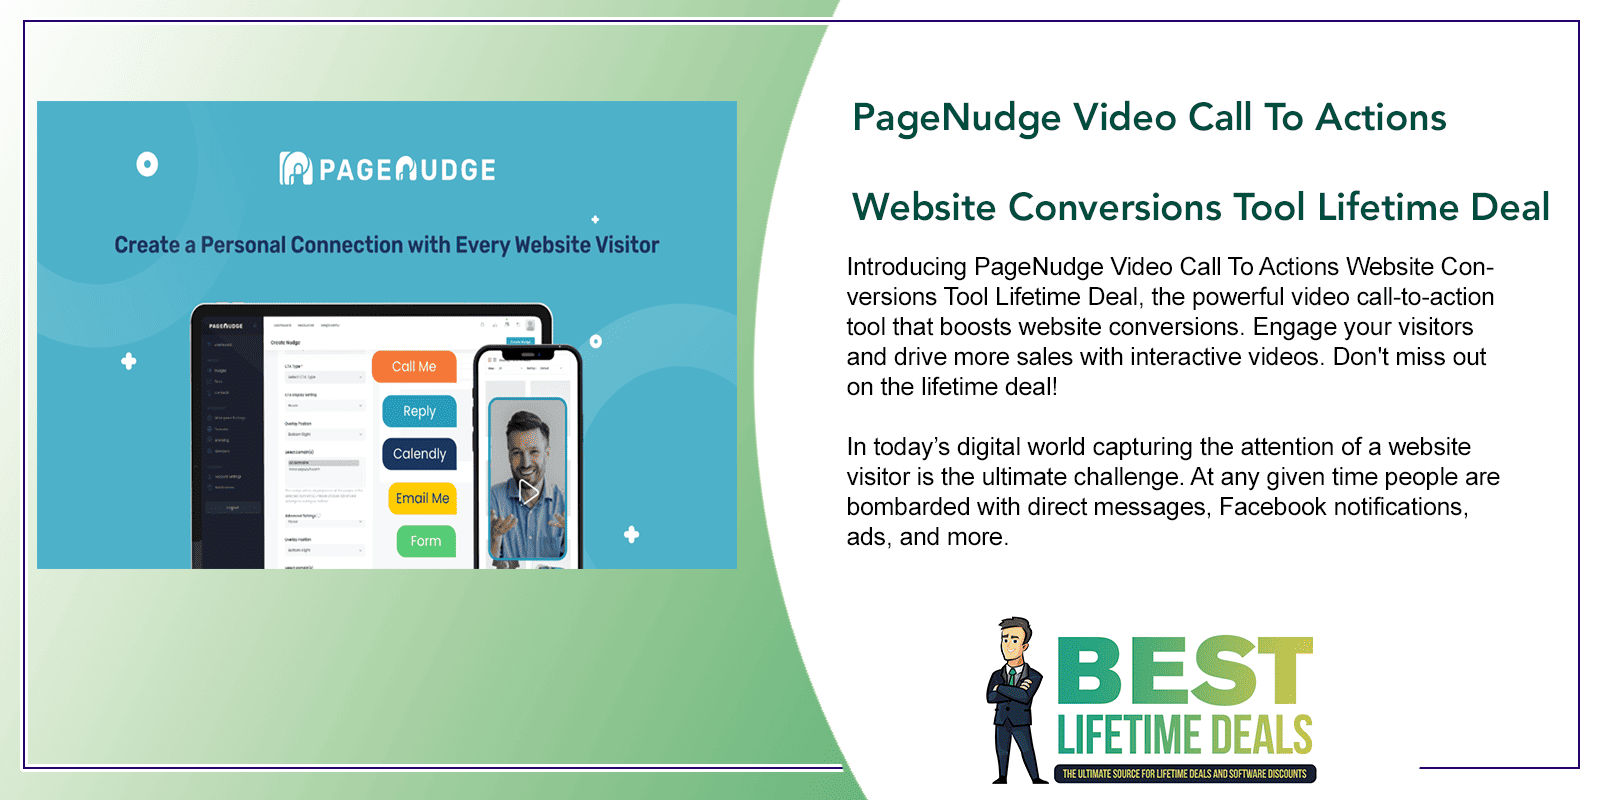 PageNudge Video Call To Actions Website Conversions Tool Lifetime Deal Featured Image